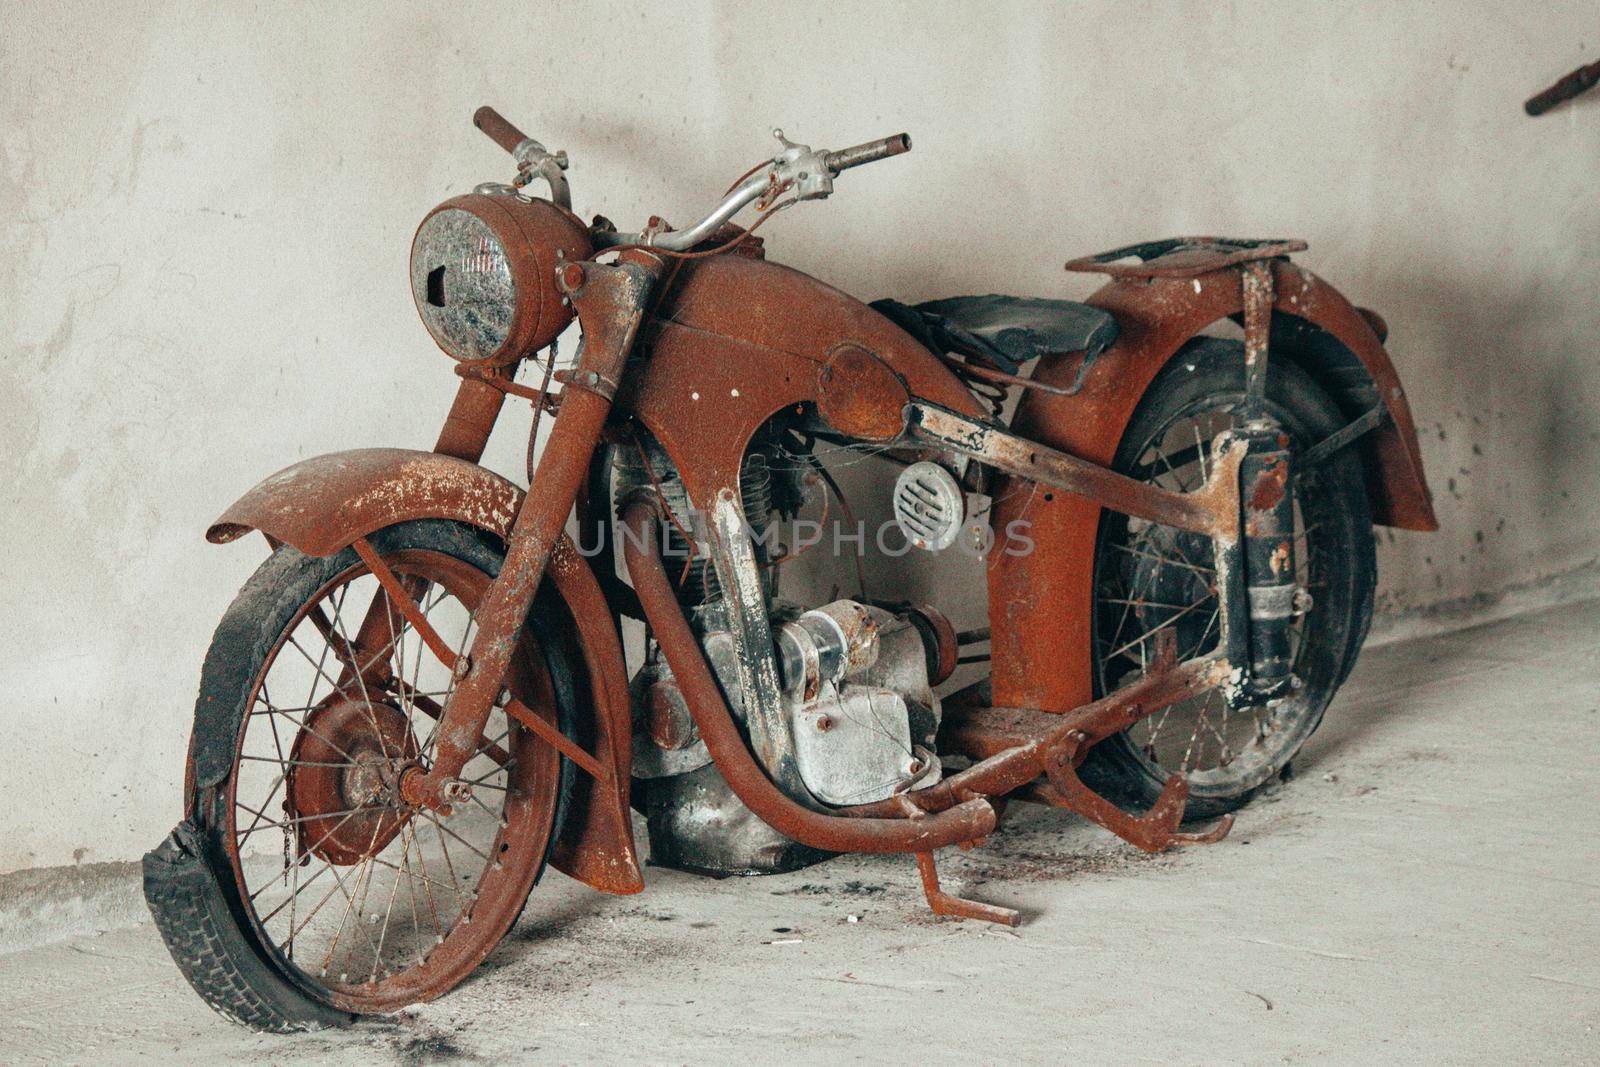 Vintage fully rusty motorcycle with torn tires. High quality photo